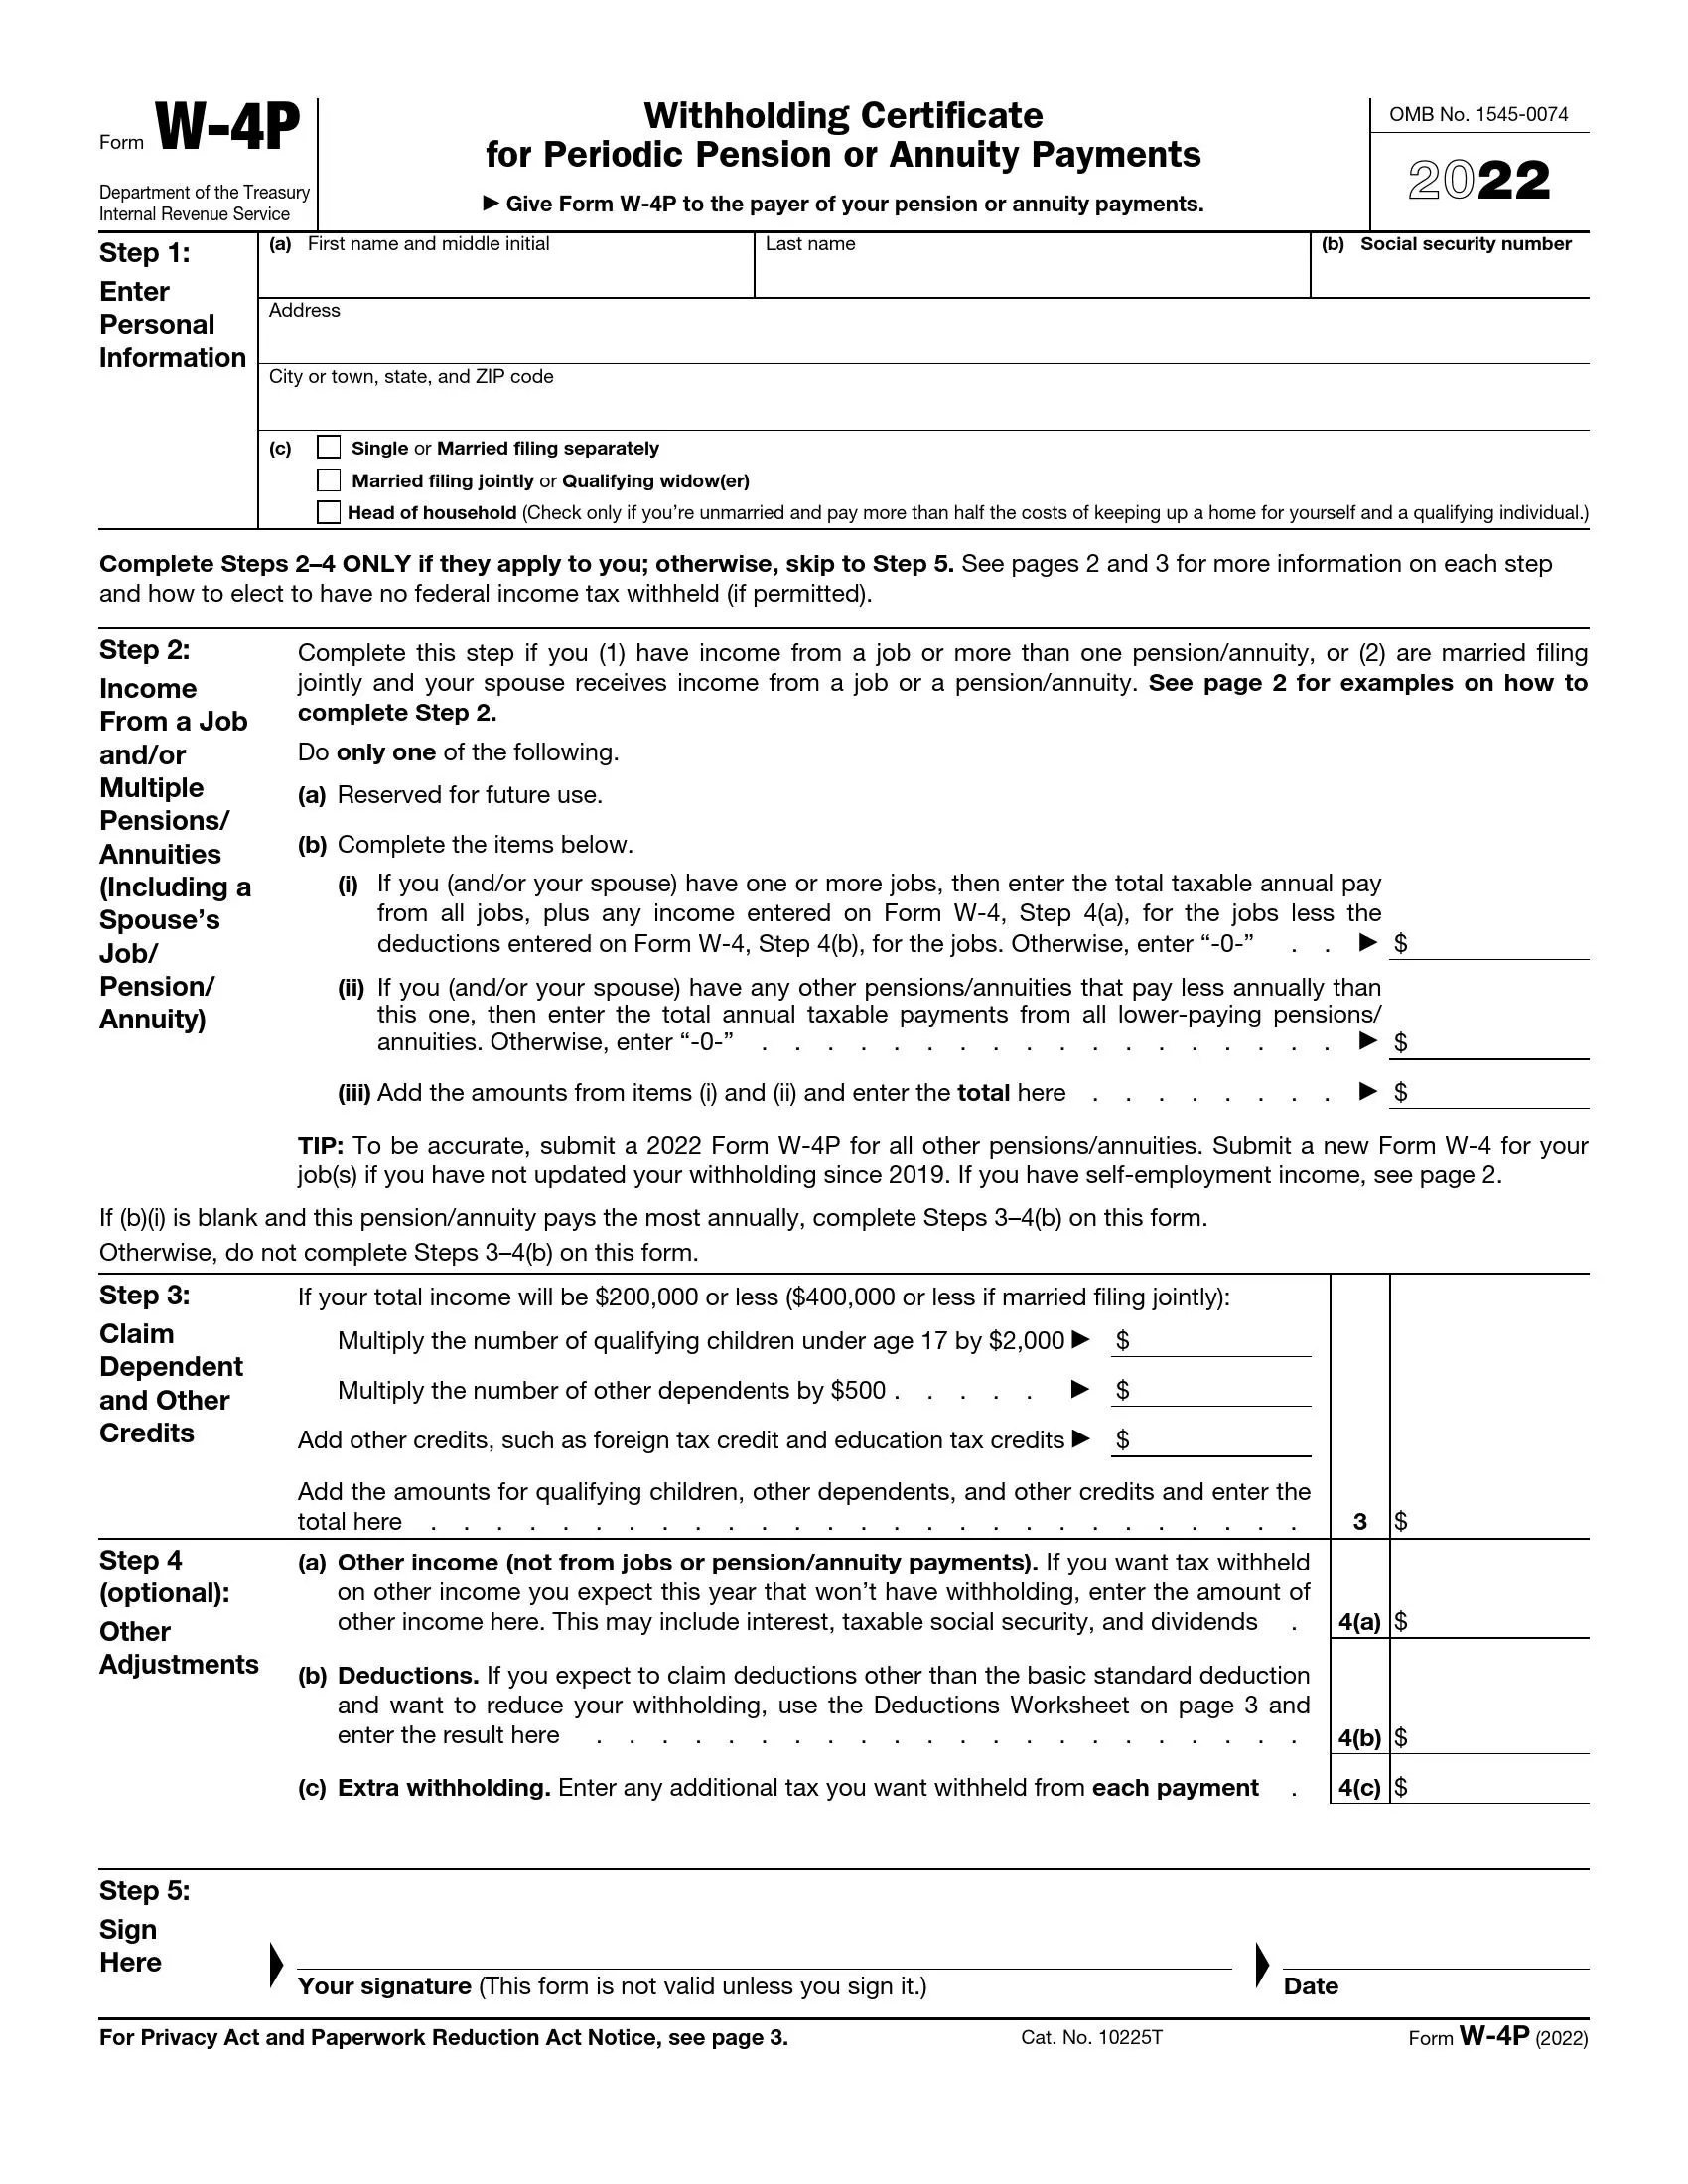 irs form w 4p 2022 preview